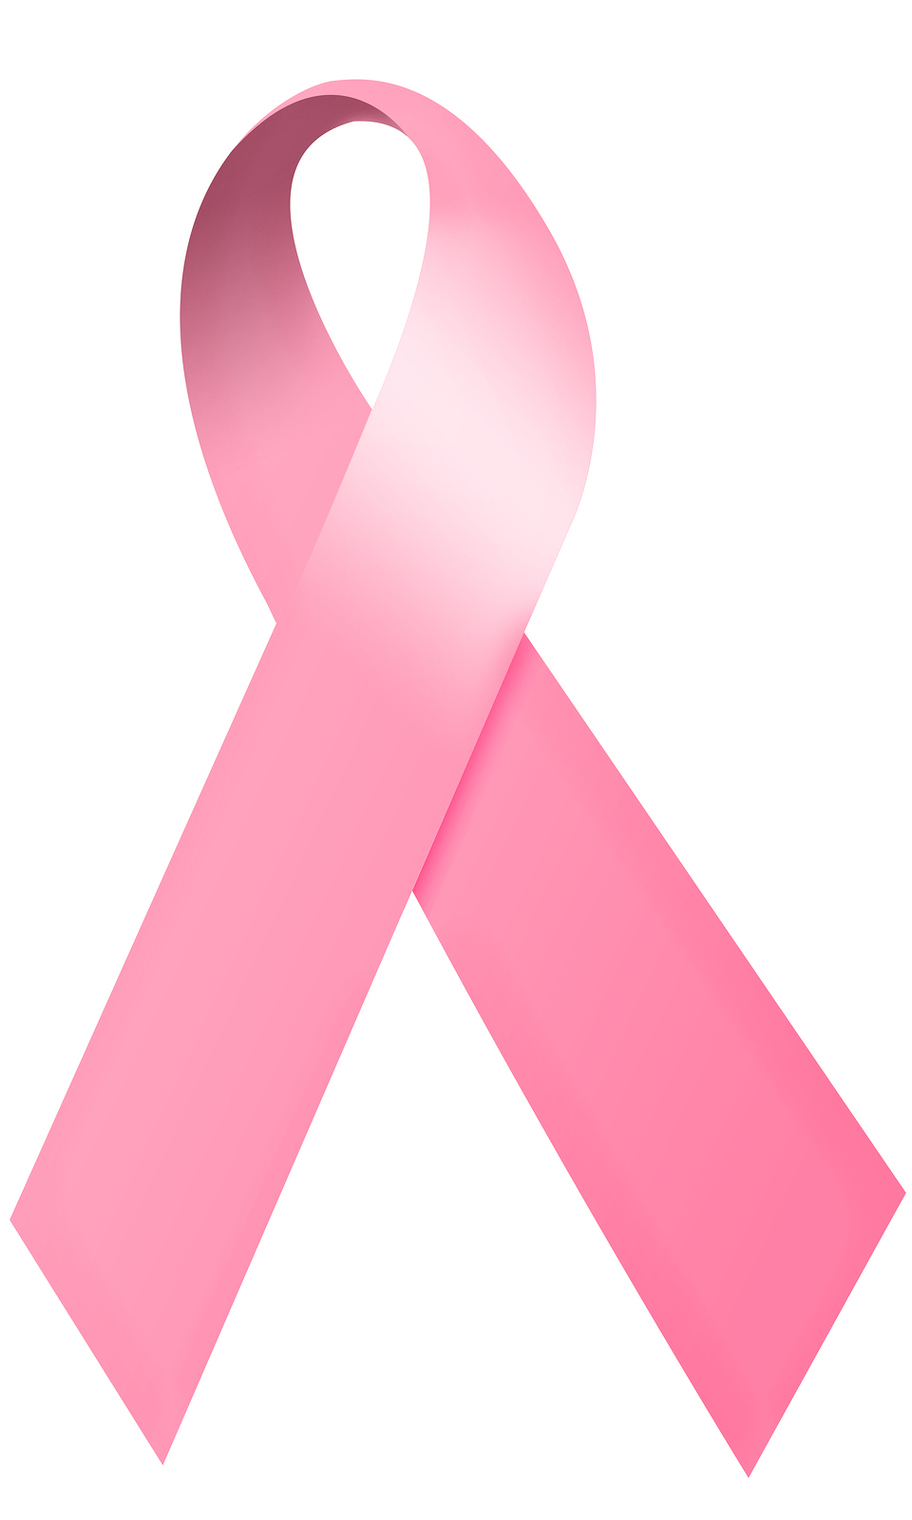 Pink Ribbon Images Free Clipart - Free to use Clip Art Resource